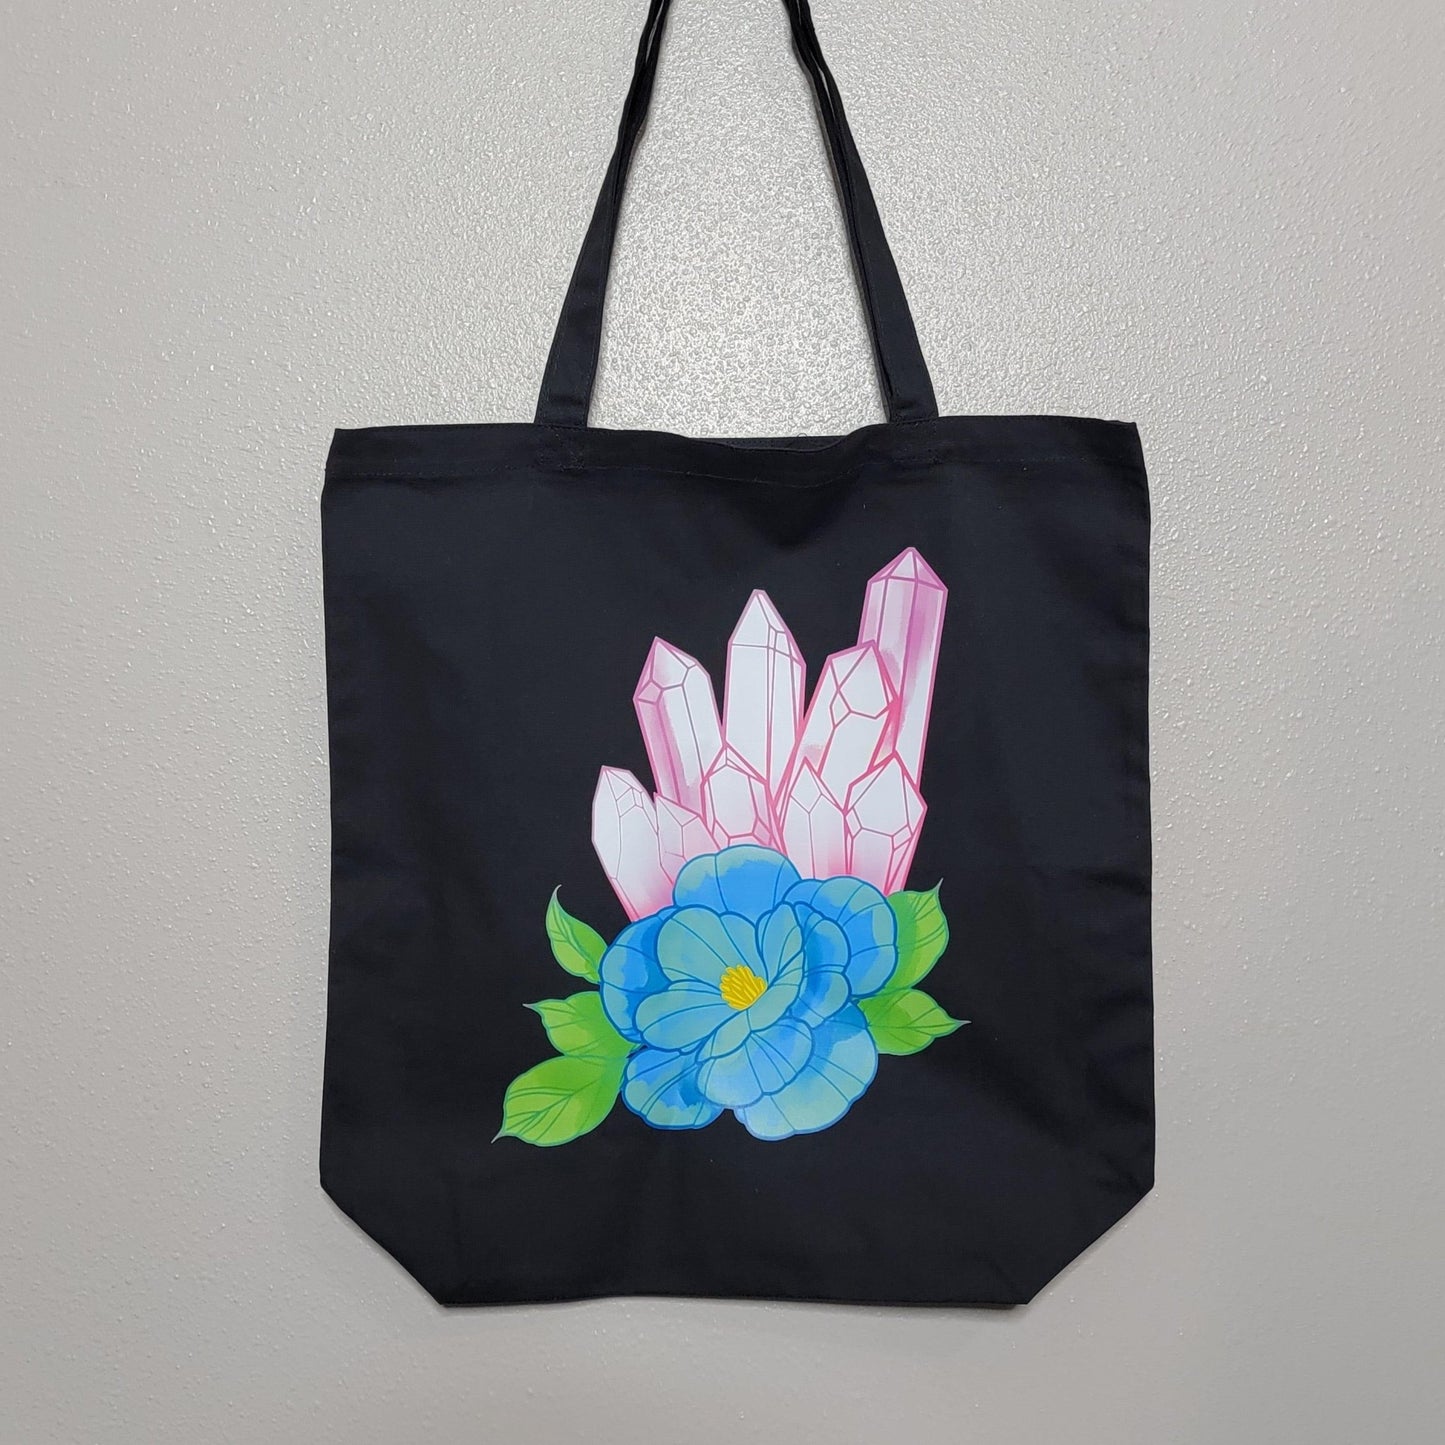 Crystals and Flowers Tote Bag - ZOMBICIDES